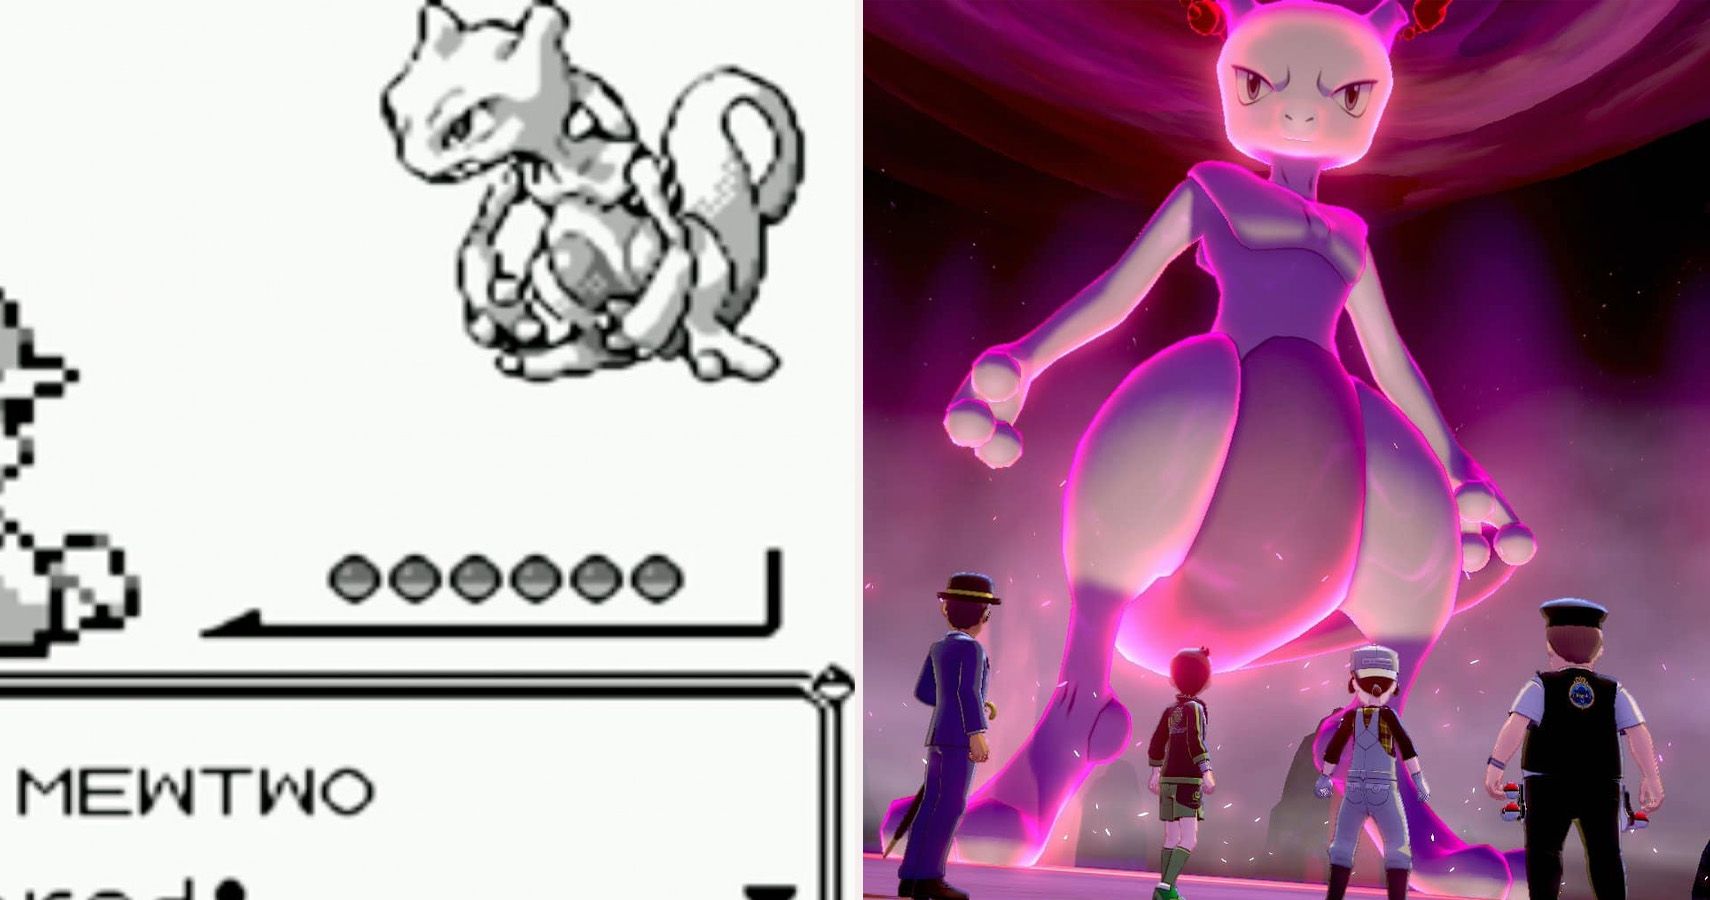 How To Unlock Mewtwo In Every Pokémon Game